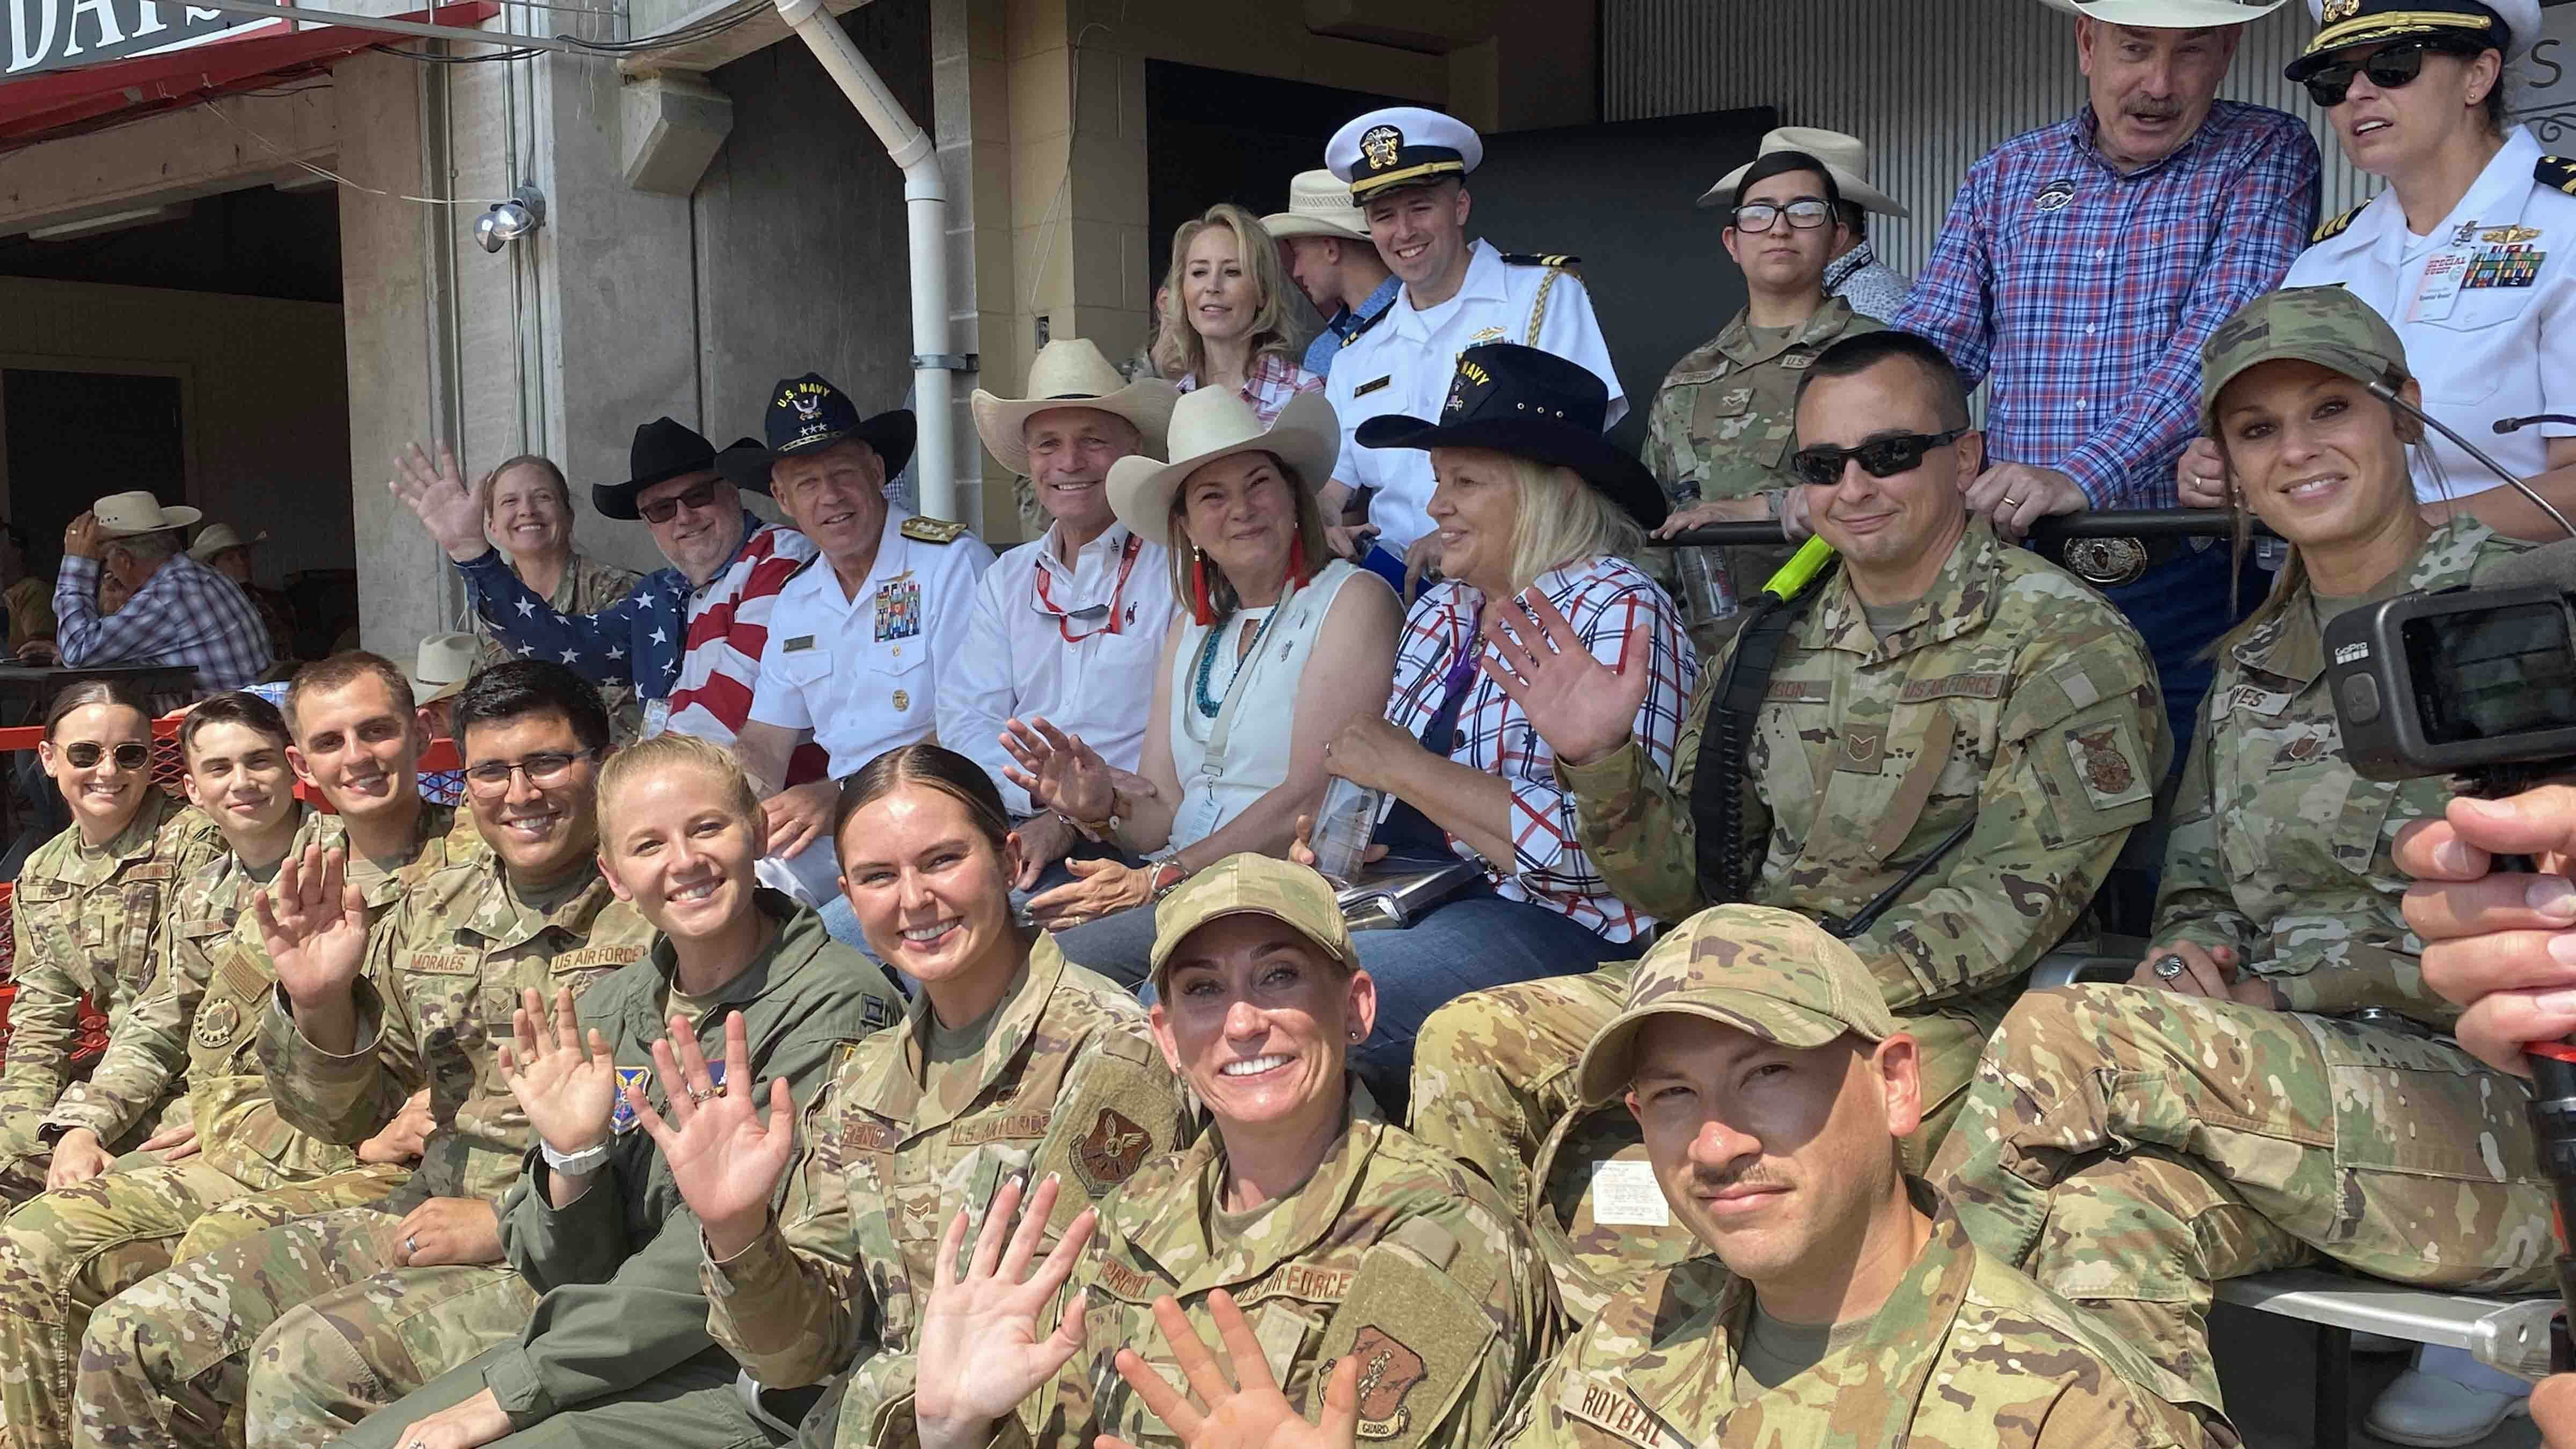 Military Monday in the Pace-O-Matic sponsor box during Cheyenne Frontier Days